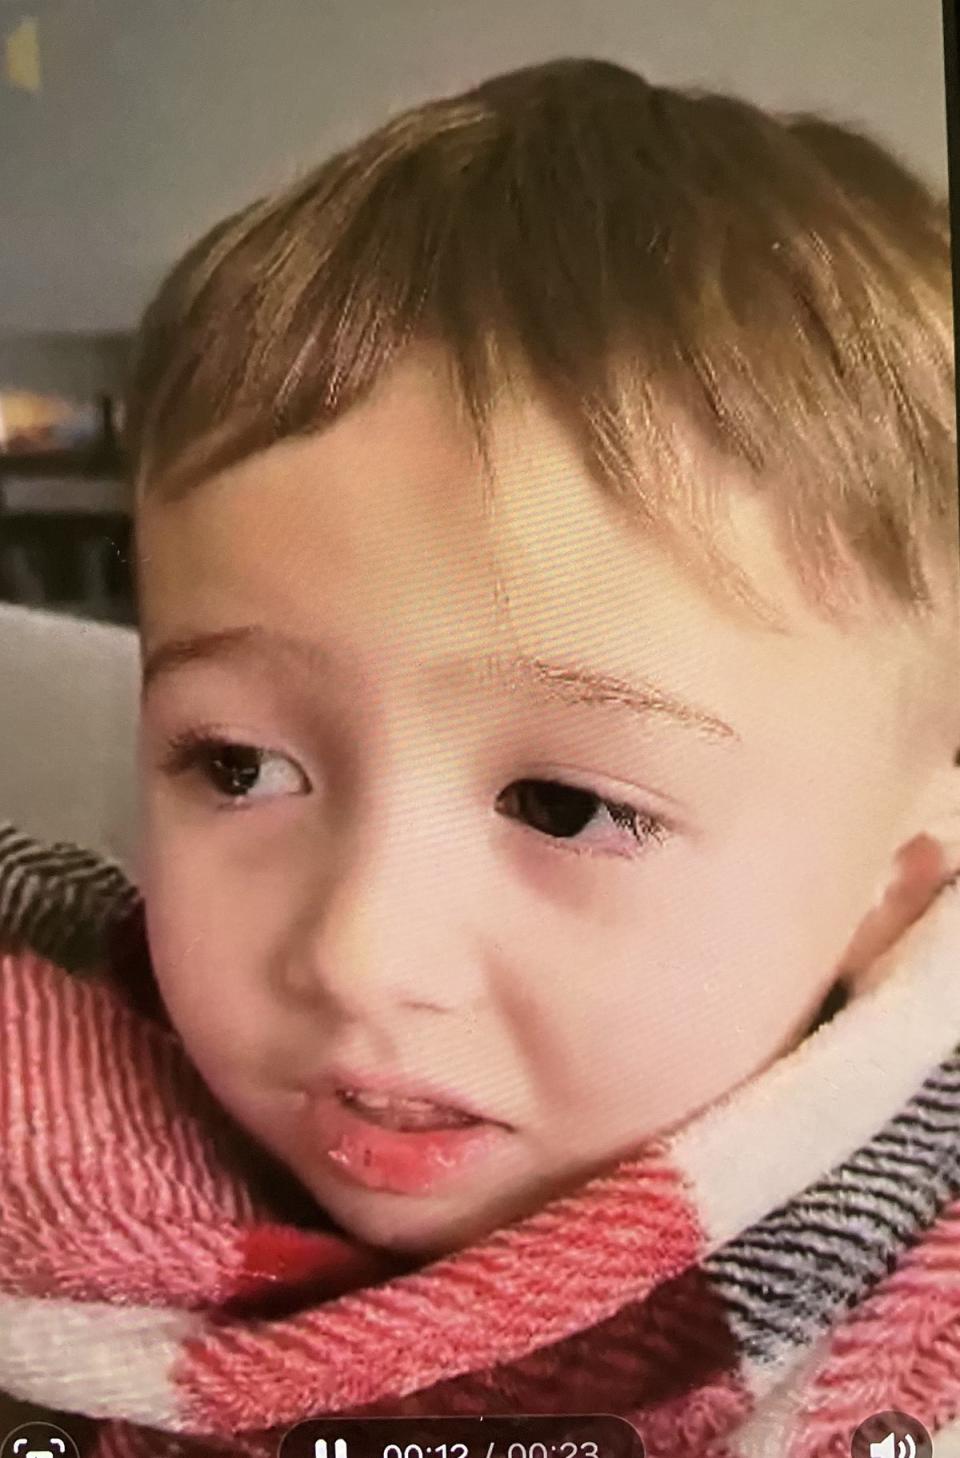 Elijah’s red-and-white blanket is the only clue reported to have been found since his disappearance (Two Rivers Police Department)